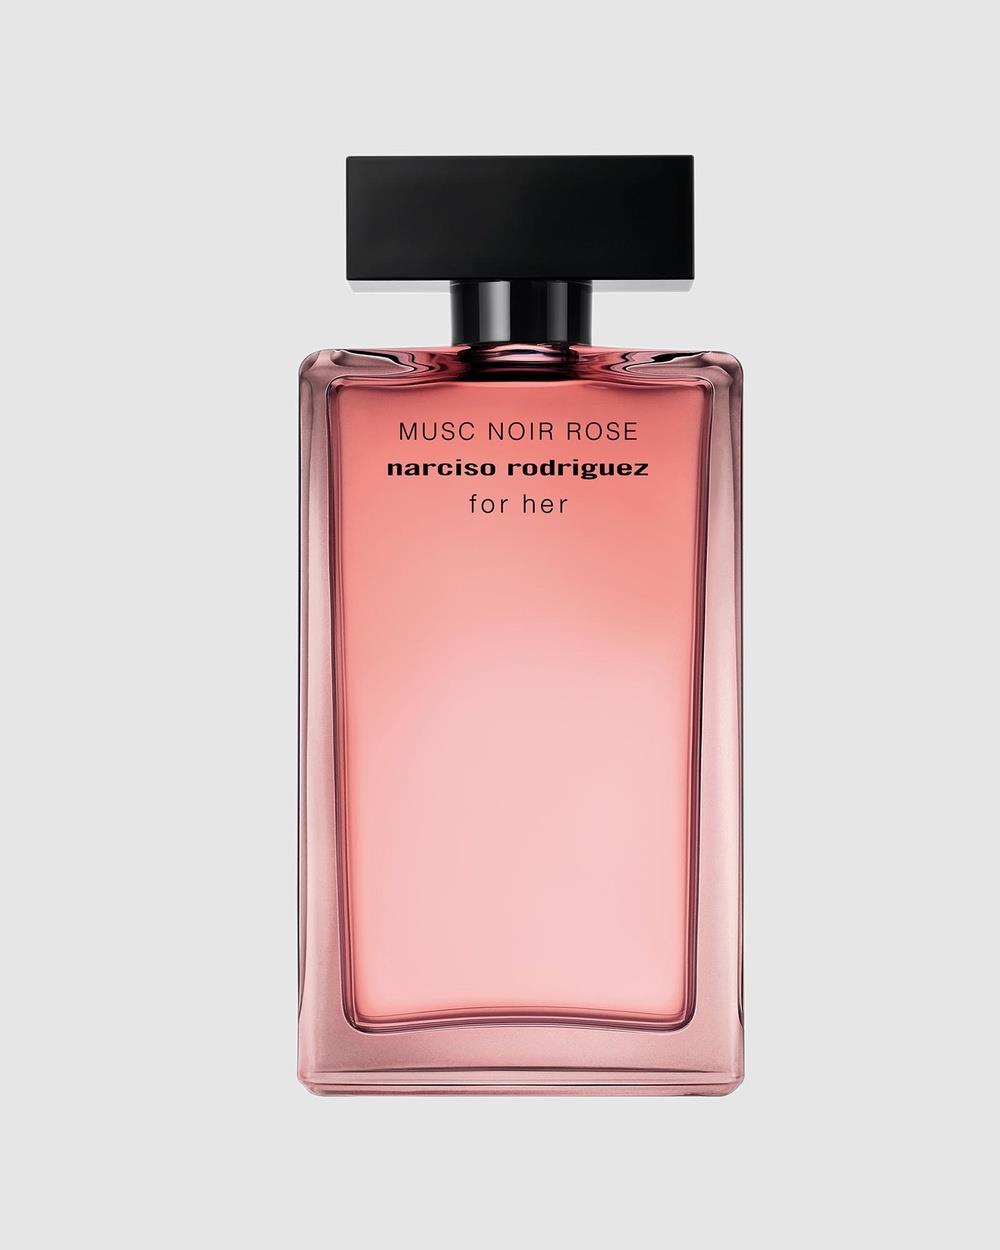 Narciso Rodriguez - Narciso Rodriguez For Her Musc Noir Rose EDP 100ml - Fragrance (EDP 100ml) Narciso Rodriguez For Her Musc Noir Rose EDP 100ml